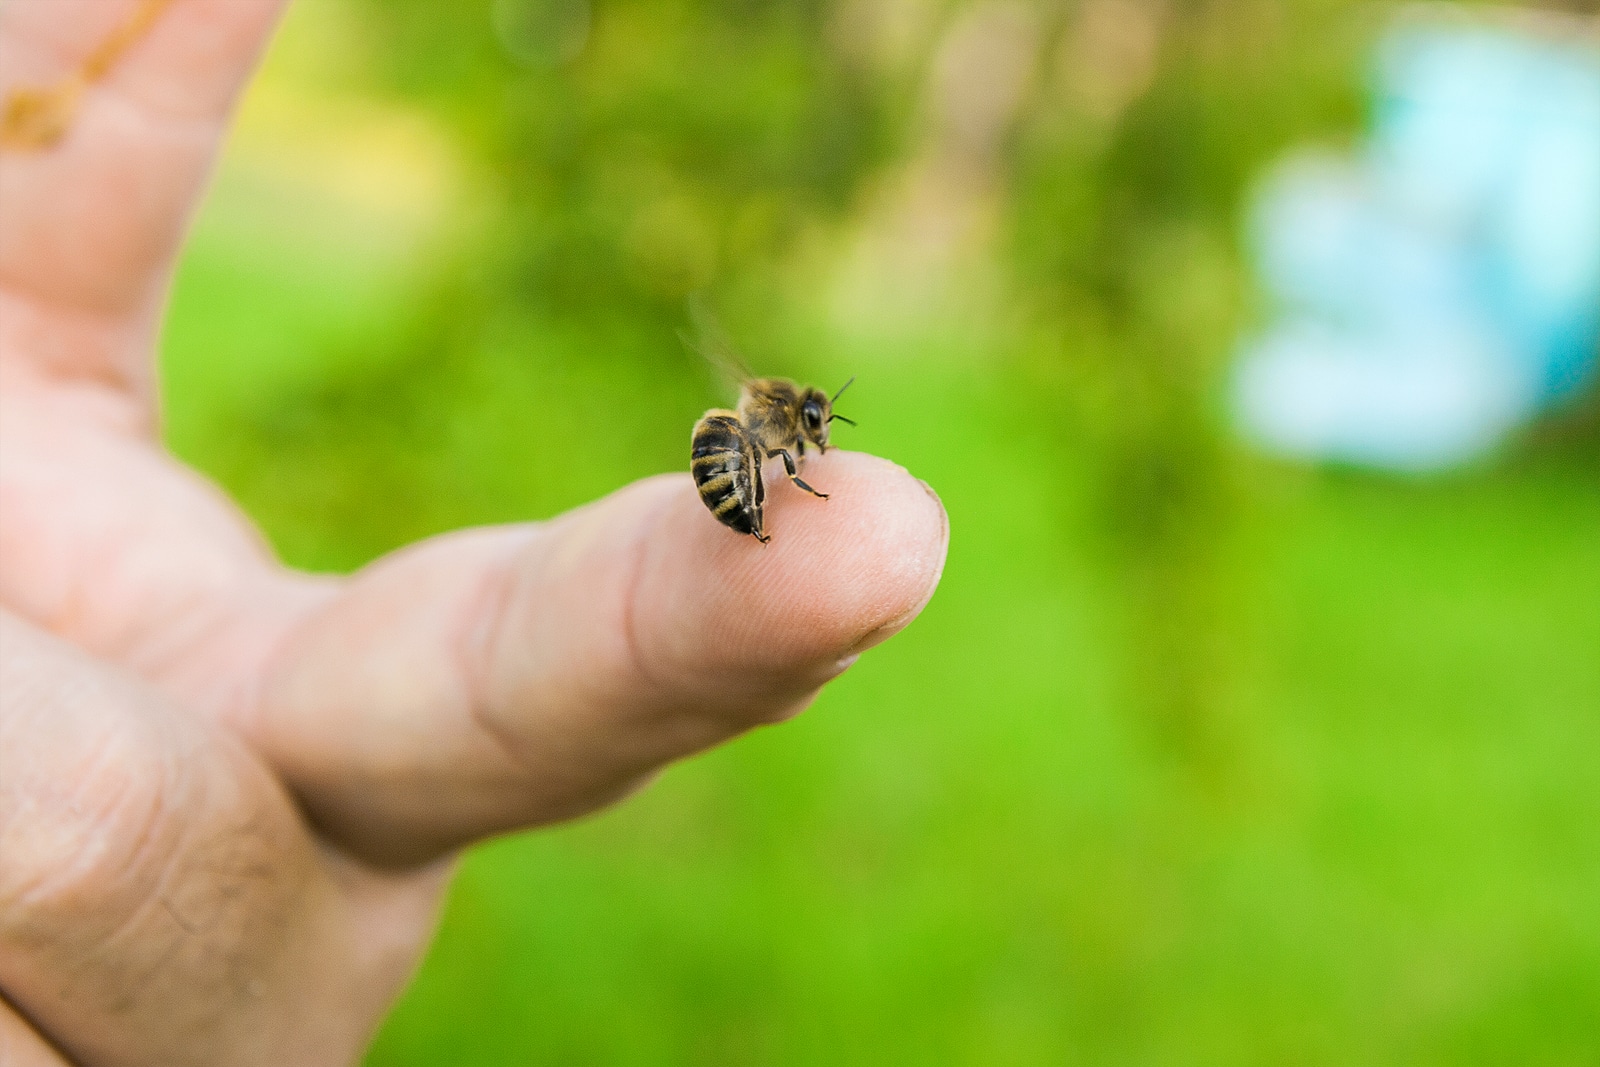 How to Protect Your Home From Stinging Insects